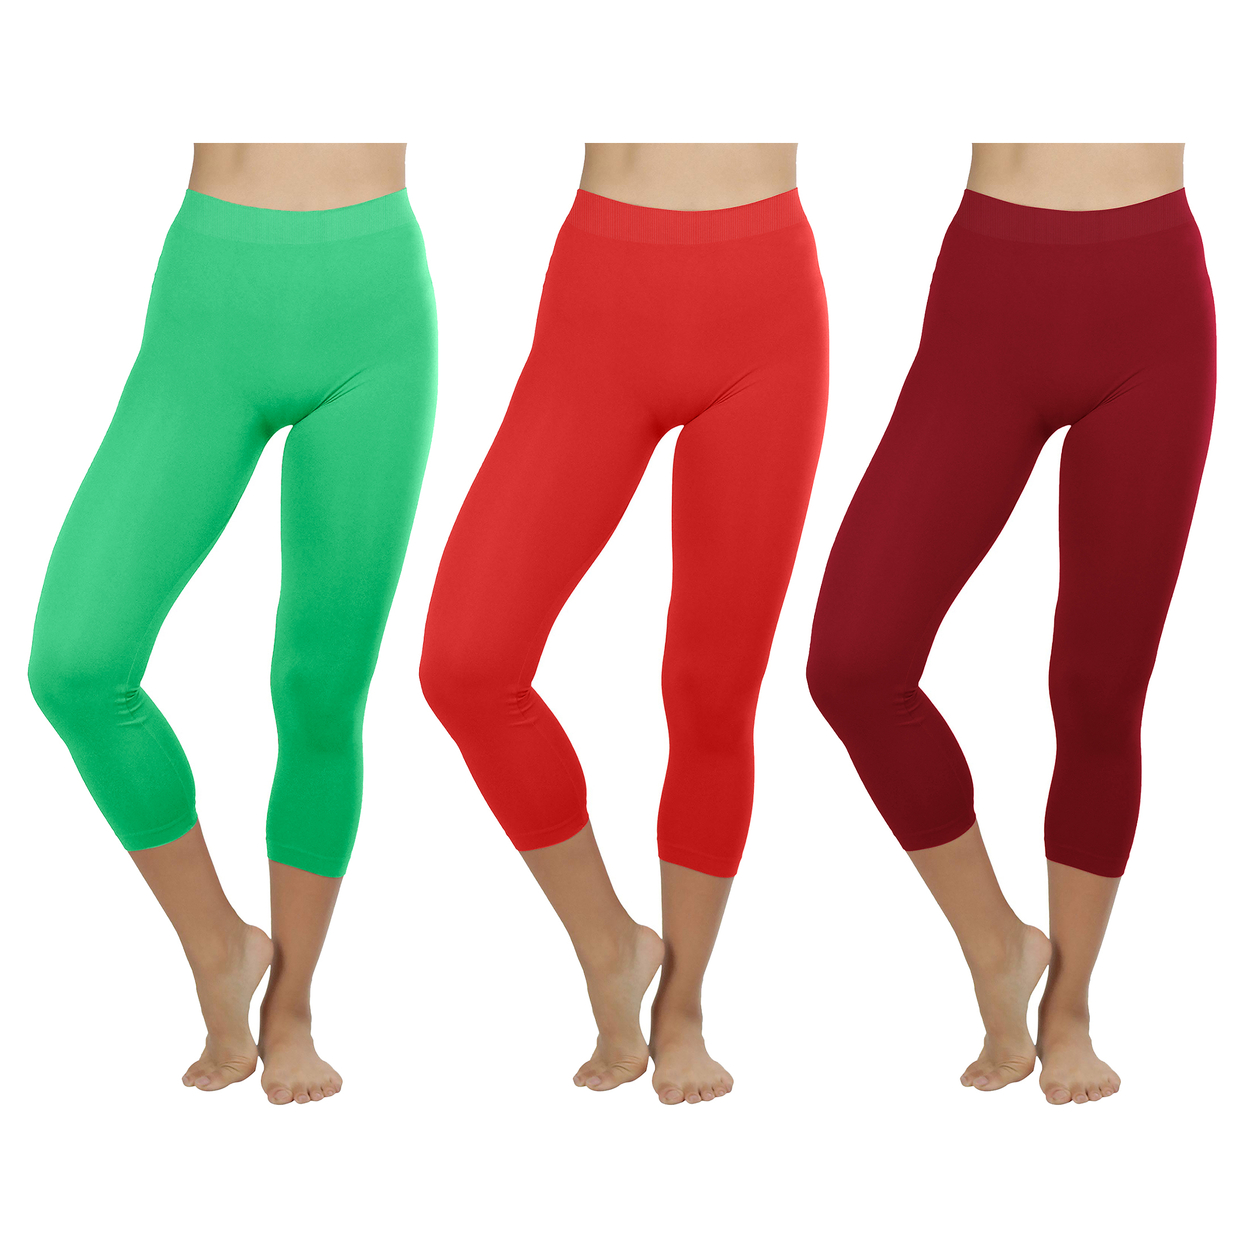 3-Pack: Women's Ultra-Soft High Waisted Smooth Stretch Active Yoga Capri Leggings - Green,green,green, X-small